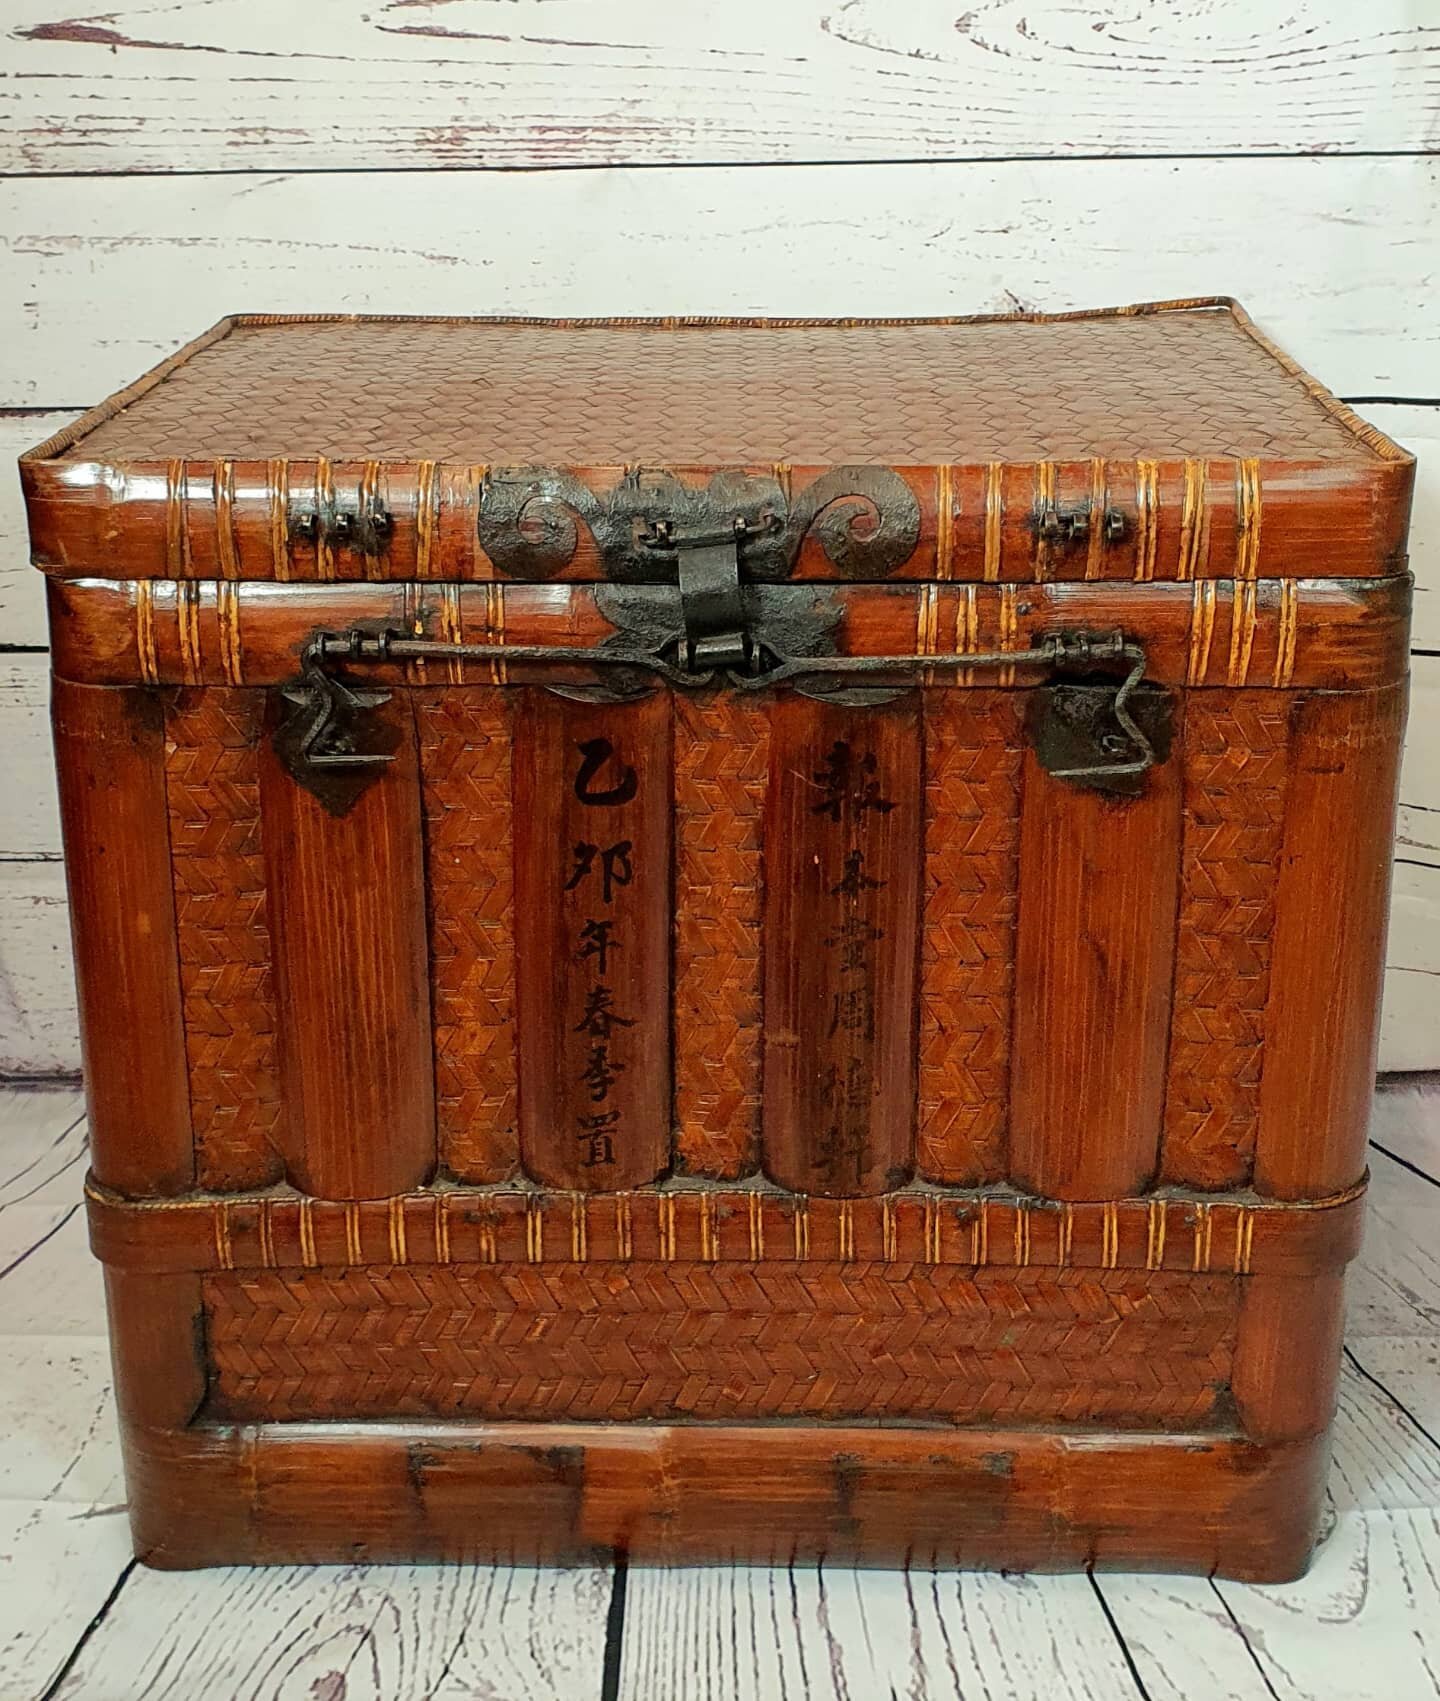 It's been a busy week.  Among my designing work,  I have been taking more shots of items from the warehouse with my new photography lighting. 

This is a stunning 'antique' (probably early 20th century), large Chinese rattan and bamboo trunk.

A beau